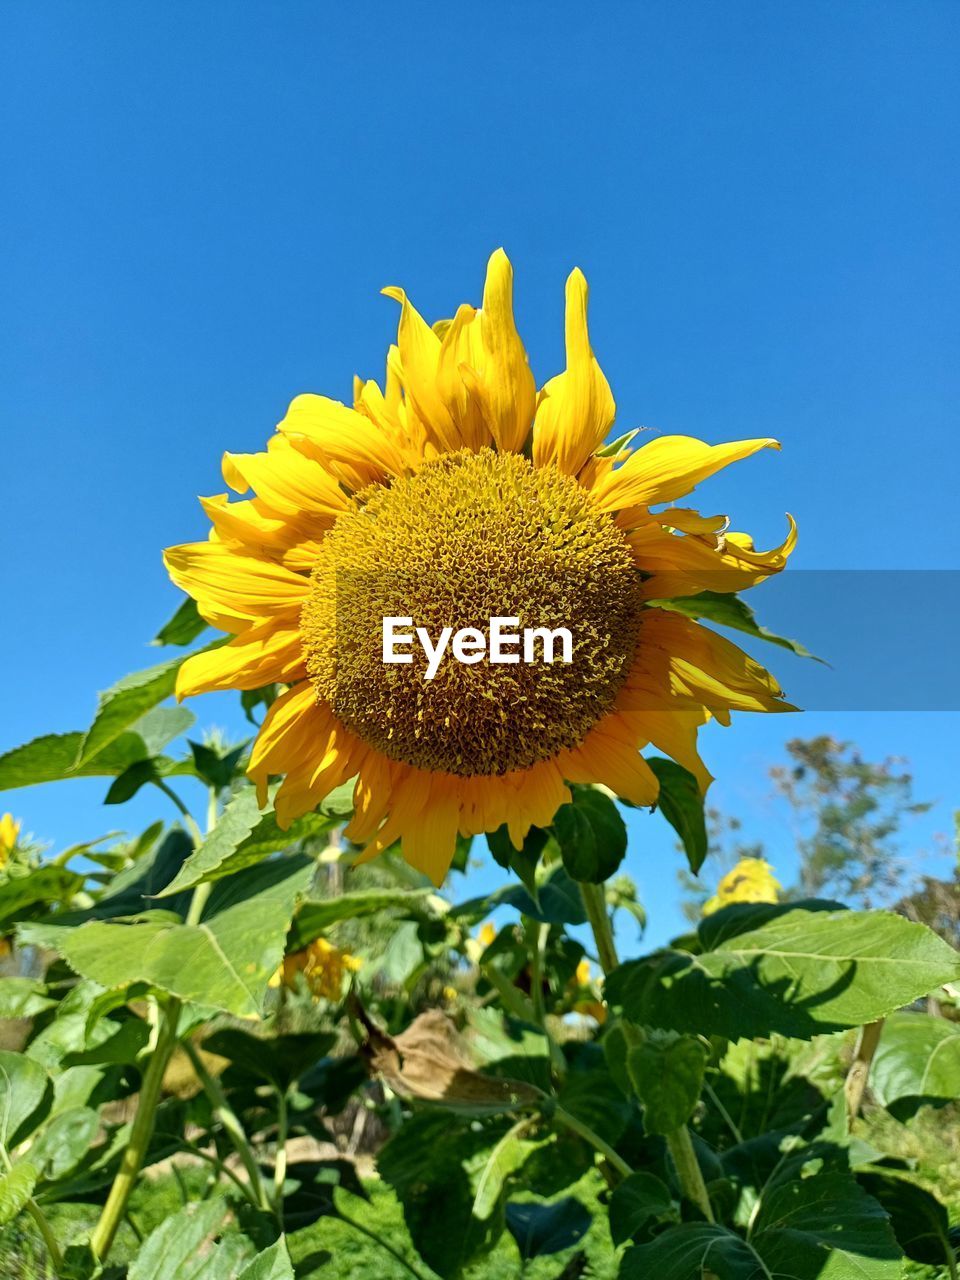 sunflower, plant, flower, flowering plant, freshness, flower head, nature, growth, yellow, beauty in nature, sky, blue, inflorescence, leaf, plant part, petal, fragility, field, clear sky, close-up, no people, landscape, summer, rural scene, low angle view, outdoors, pollen, sunny, sunflower seed, agriculture, sunlight, asterales, springtime, vibrant color, day, botany, green, blossom, food, food and drink, environment, land